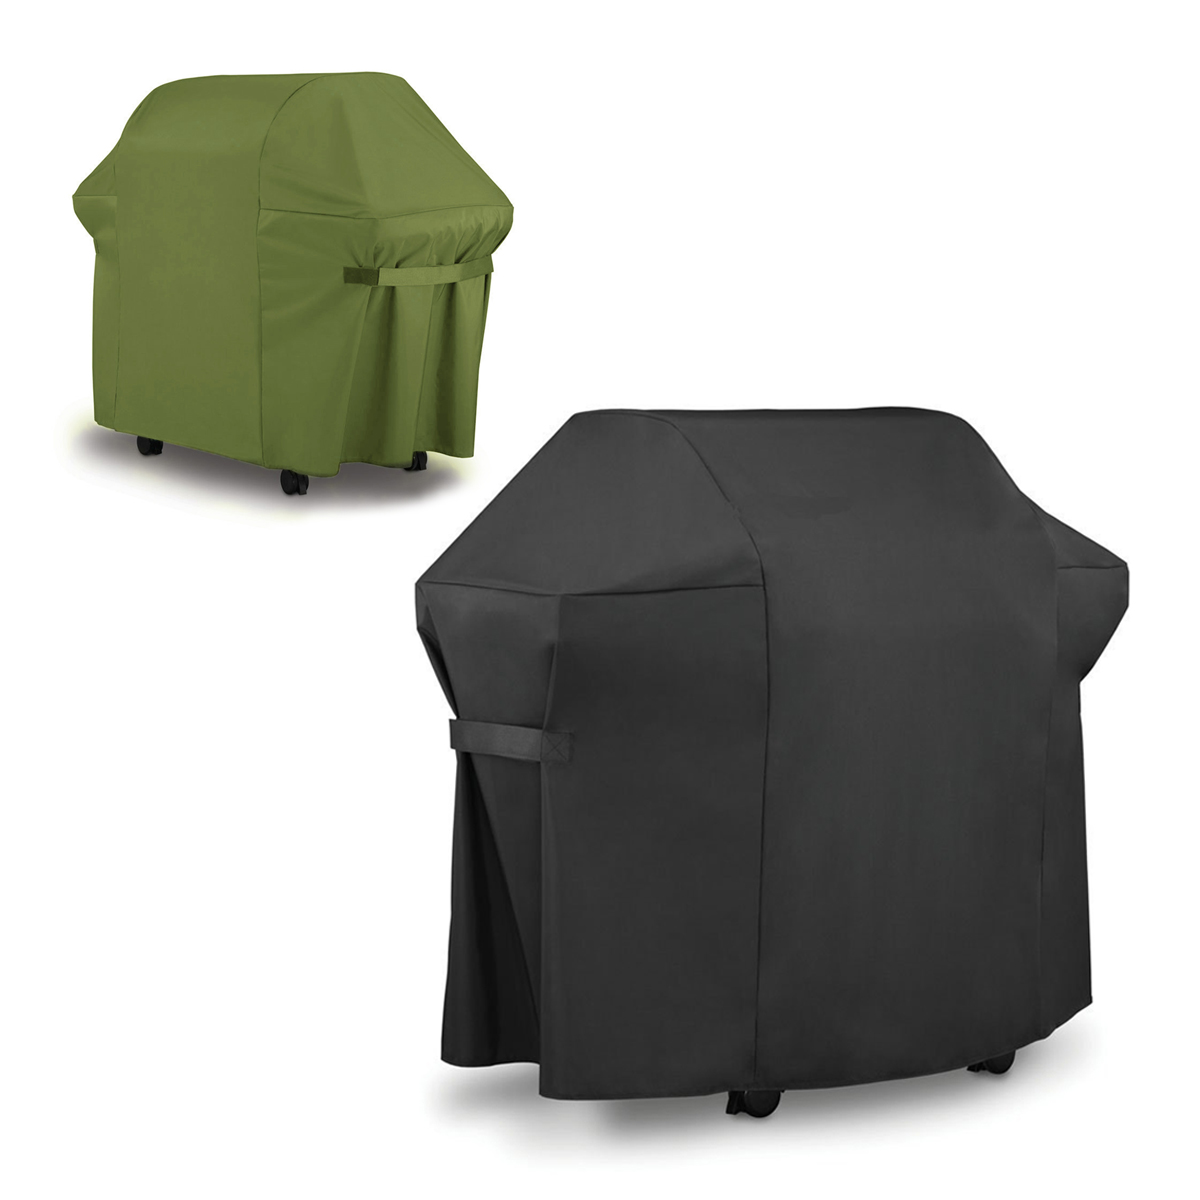 

BBQ Grill Cover For Weber 7553 / 7107 Black Green Gas Grills Outdoor Waterproof Furniture Waterproof Cover